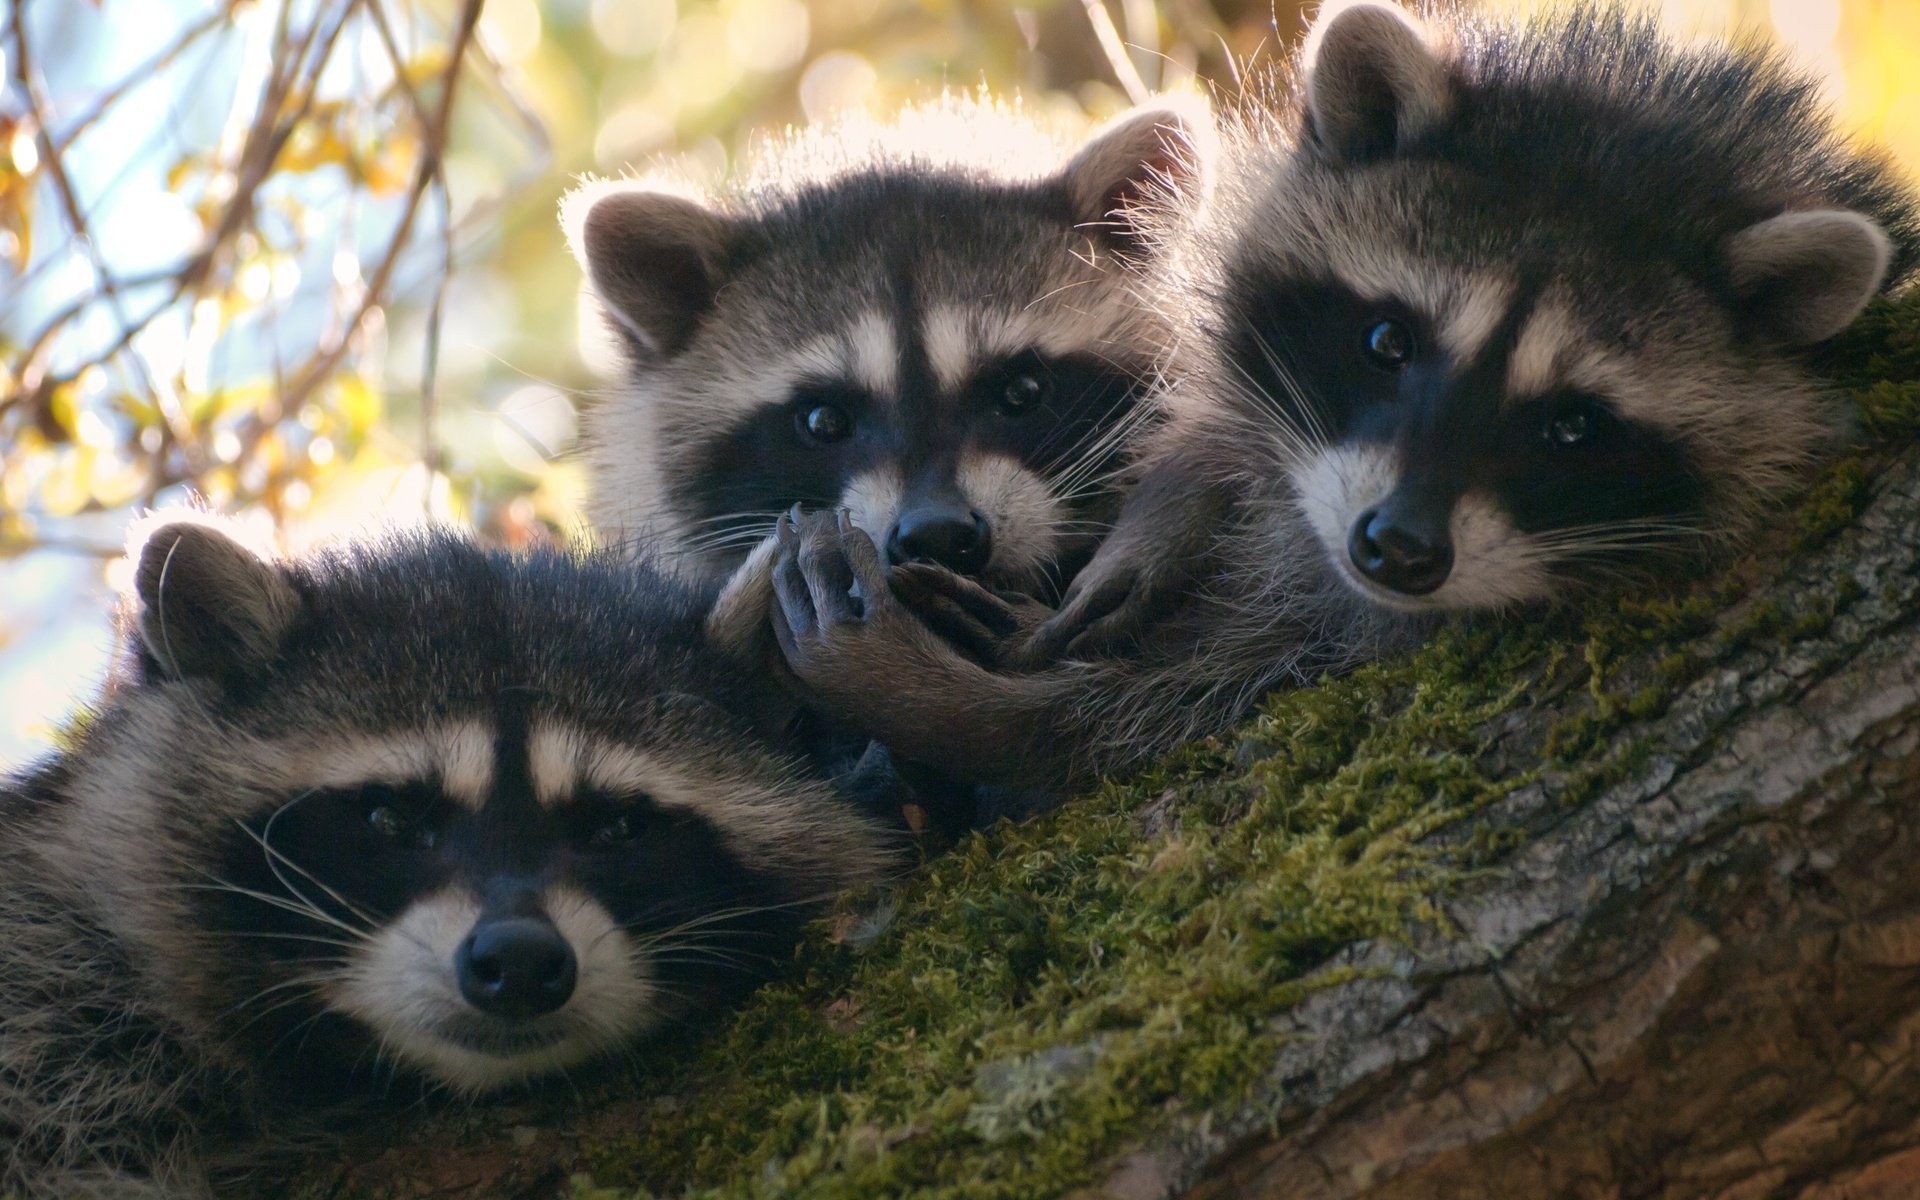 Raccoon Full HD Wallpaper and Background Image | 1920x1200 | ID:312646